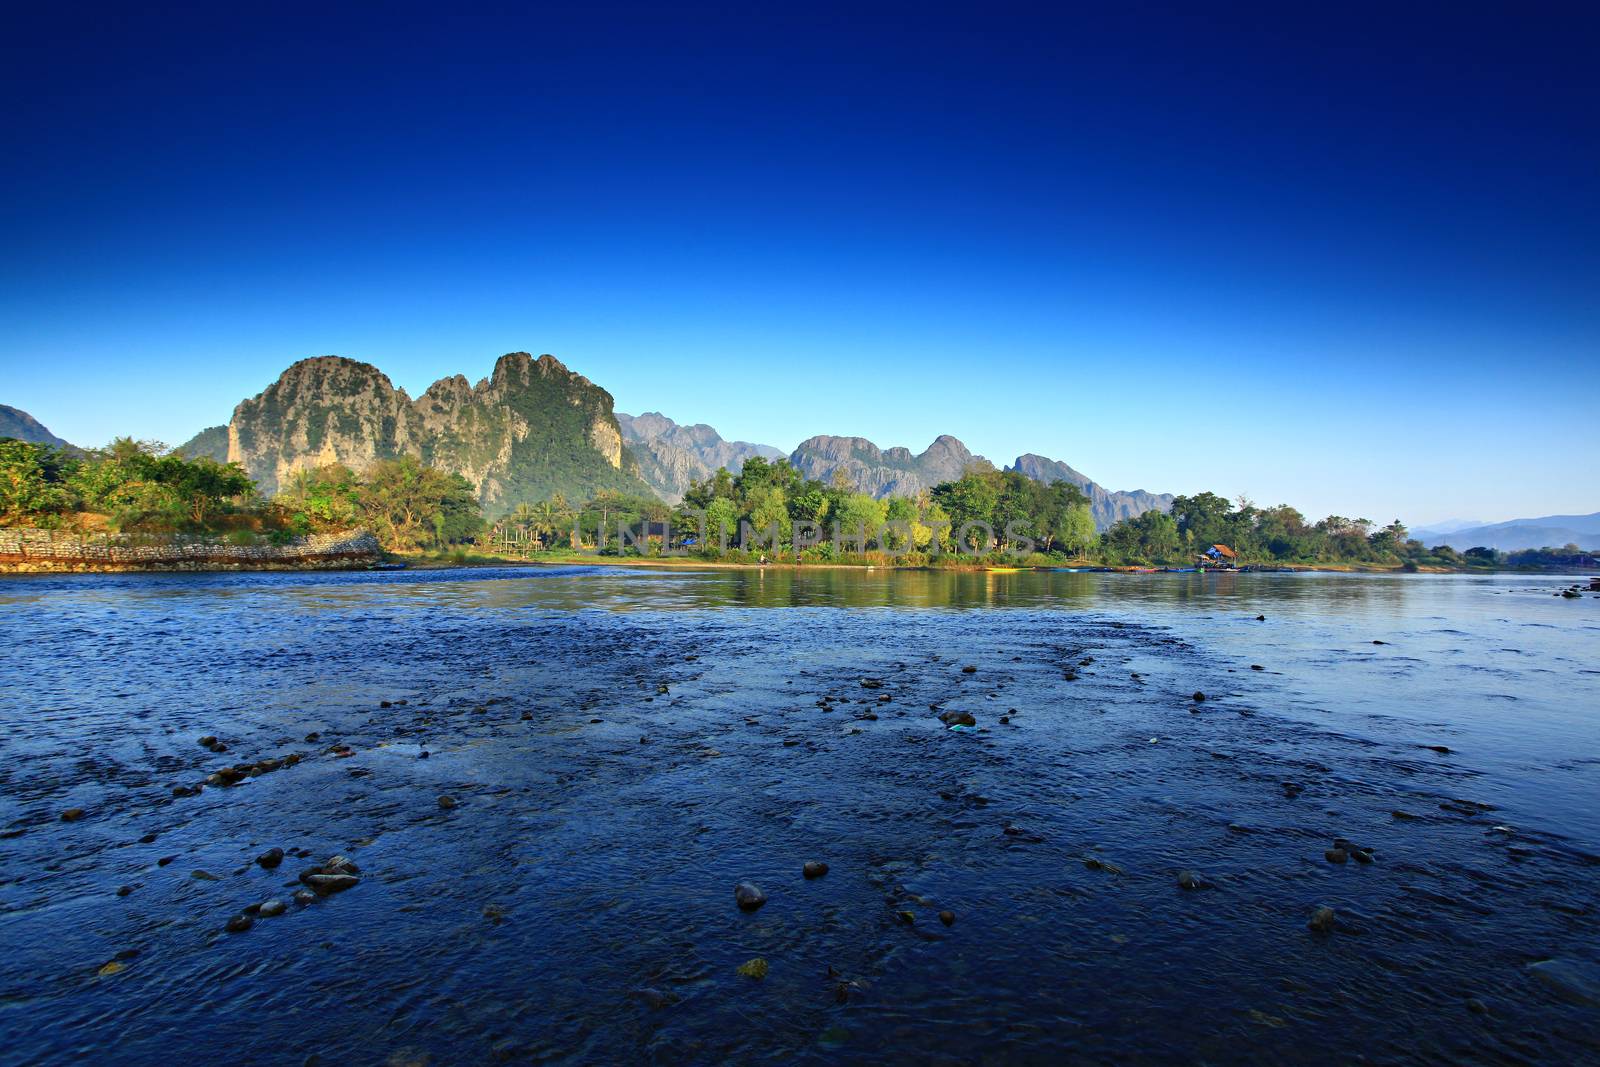 Beautiful landscape on the Nam Song River in Vang Vieng, Laos